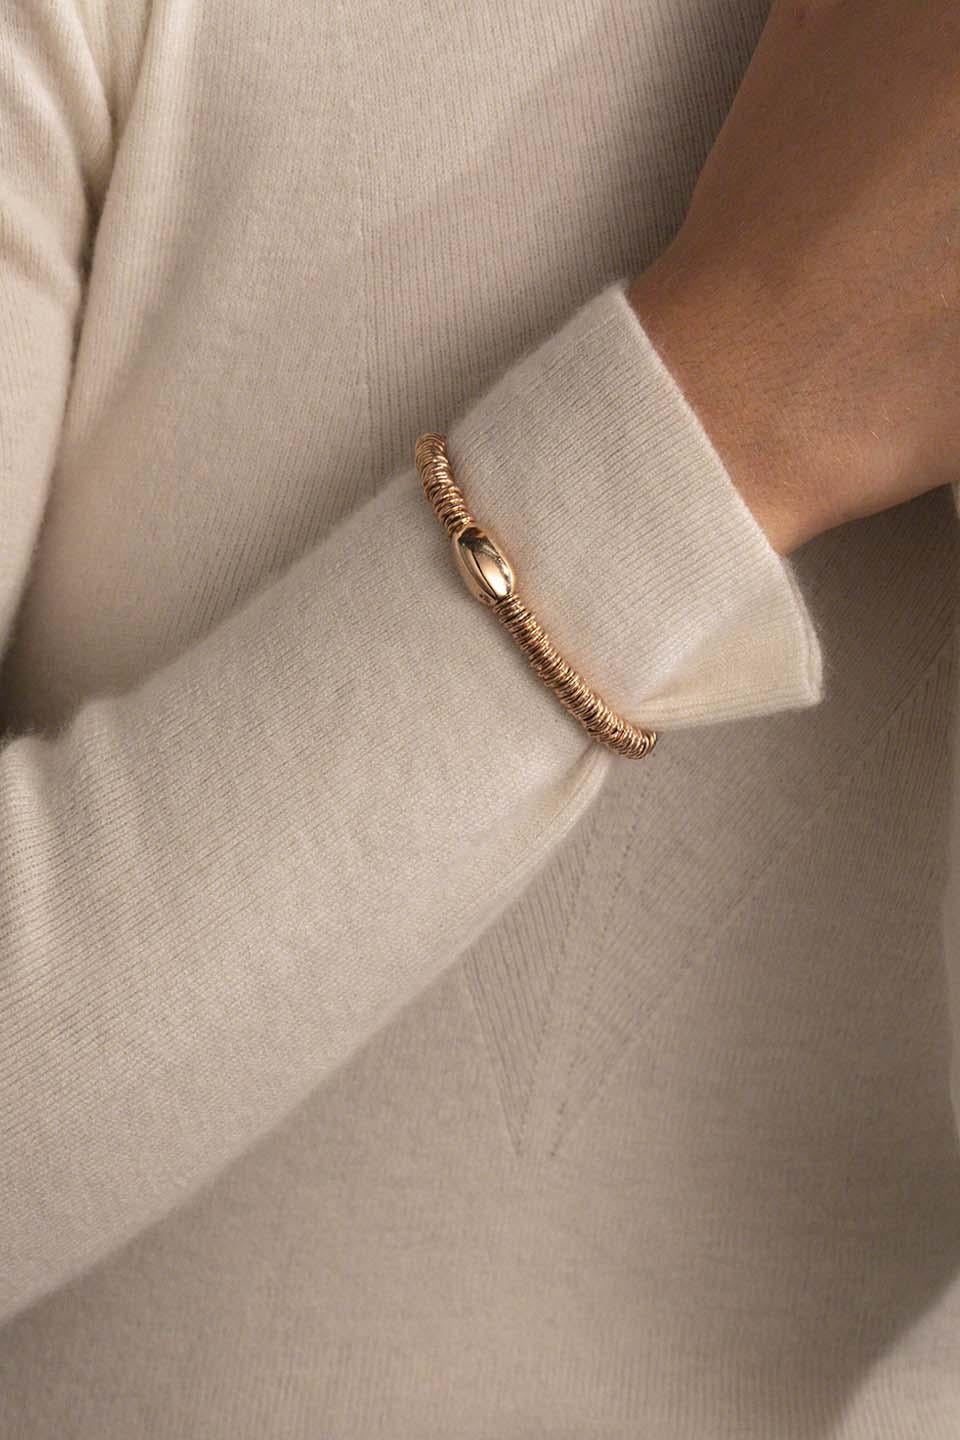 BabyBang Rosé Bracelet / Rose Gold. Stretch silver bracelet with a rose gold 9Kt nugget.

Practical. Attractive. Contemporary
The Bang collection, best-seller elastic bracelet for several years, is enriched by a smaller version, more cool and